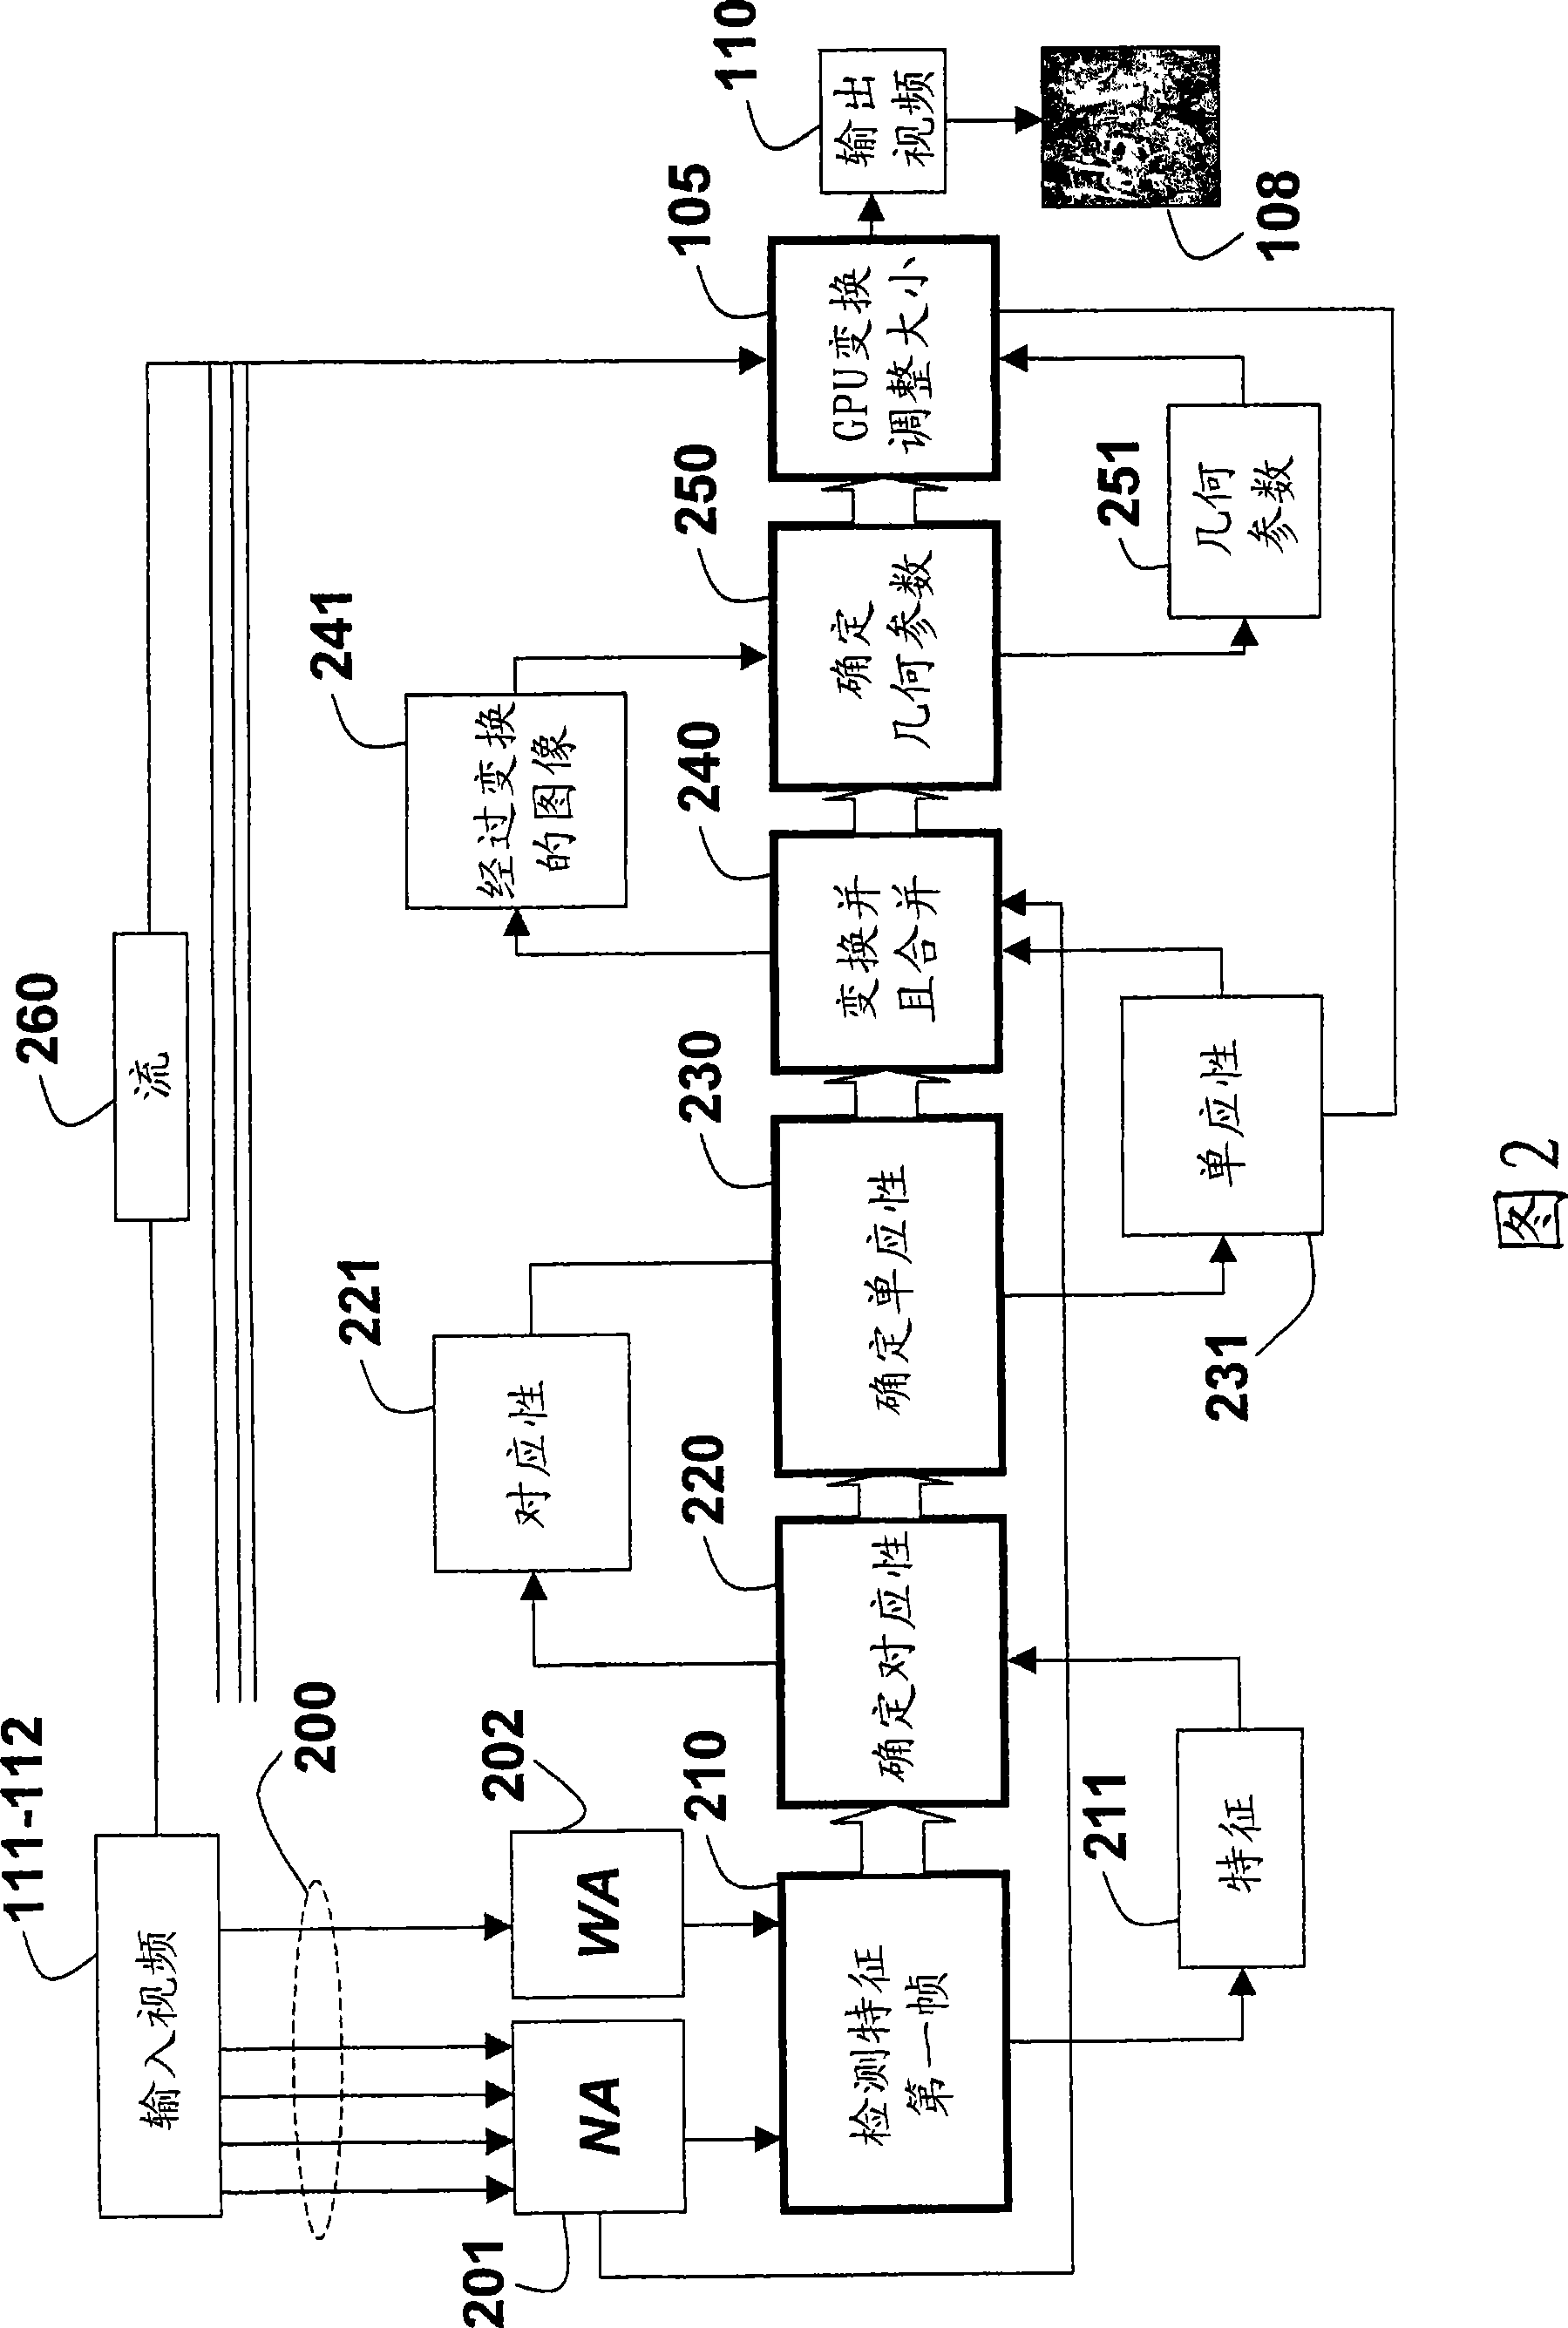 Method and system for combining videos for display in real-time